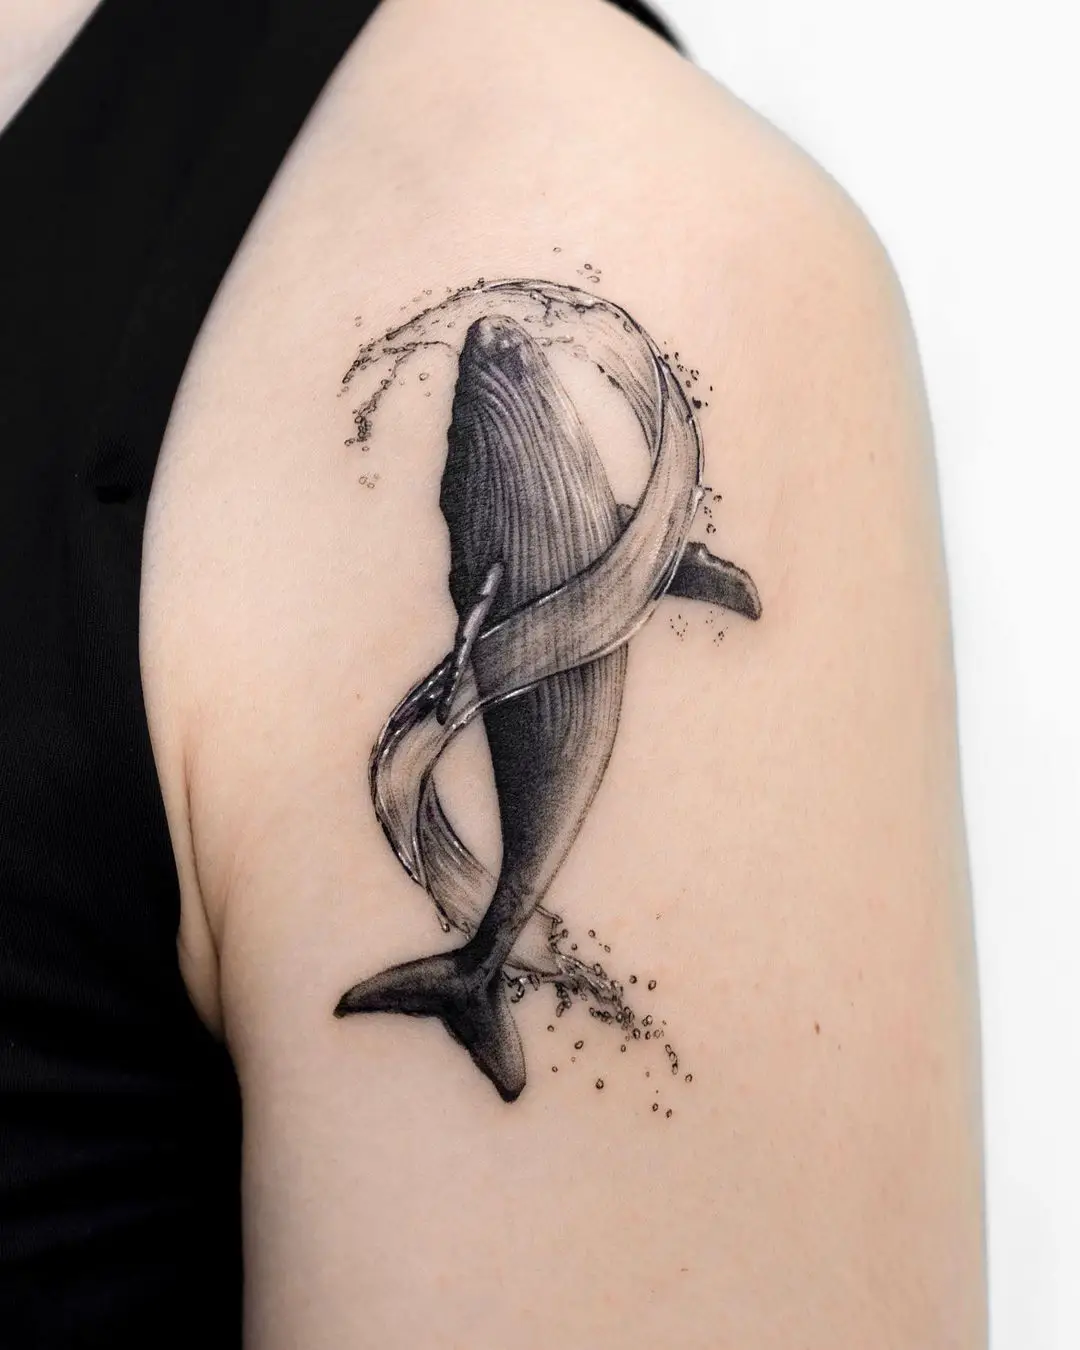 Whale tattoo design by start.your .line